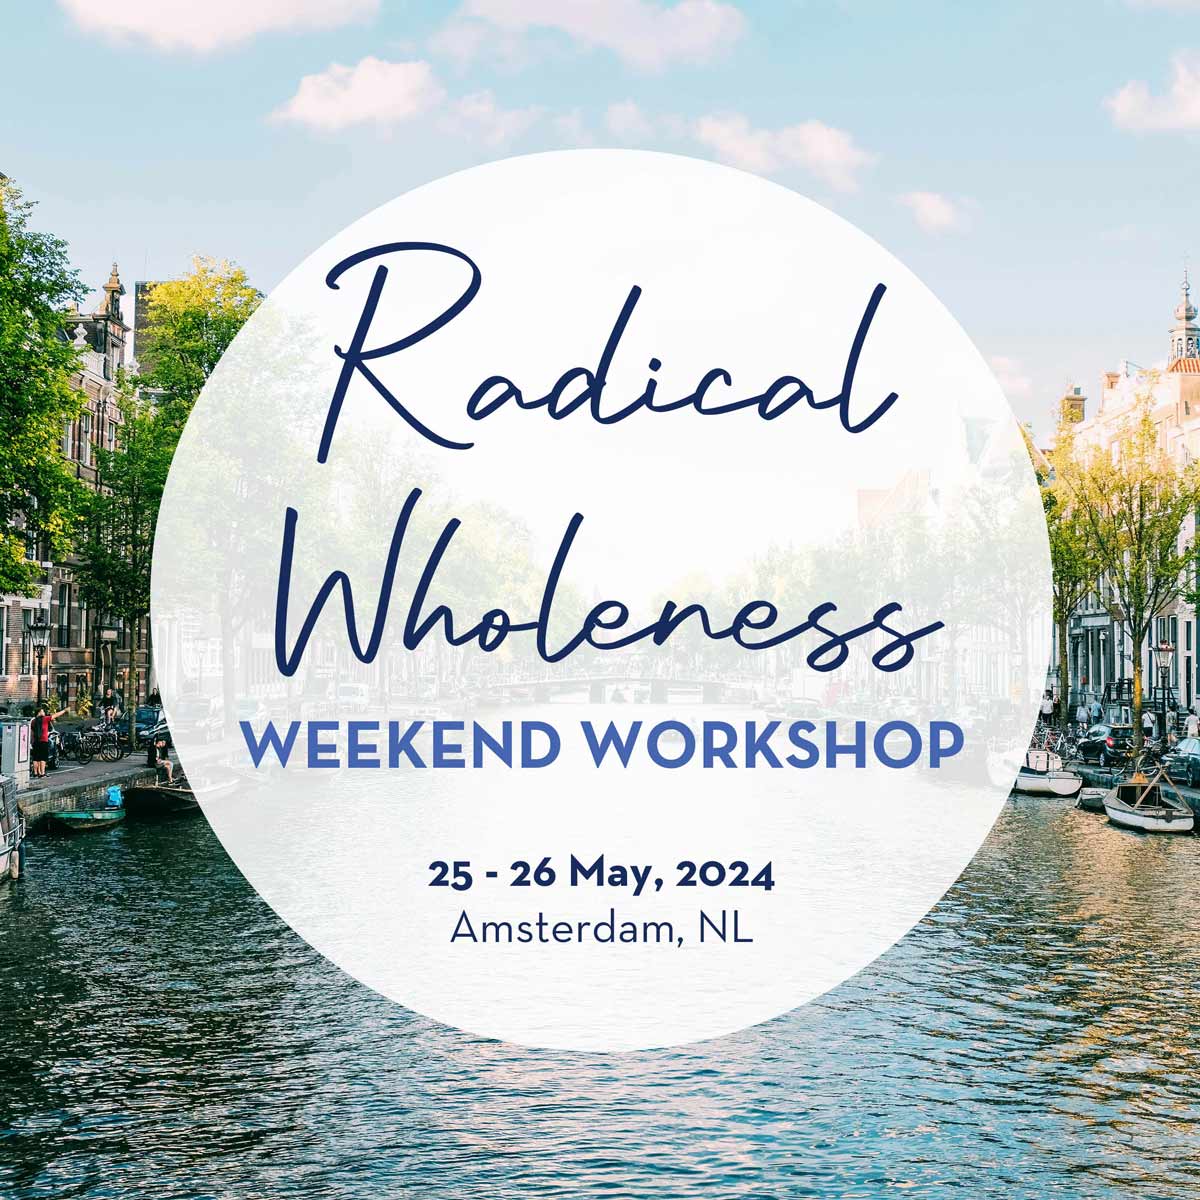 Radical Wholeness Weekend Workshop: Amsterdam - The Embodied Present Process